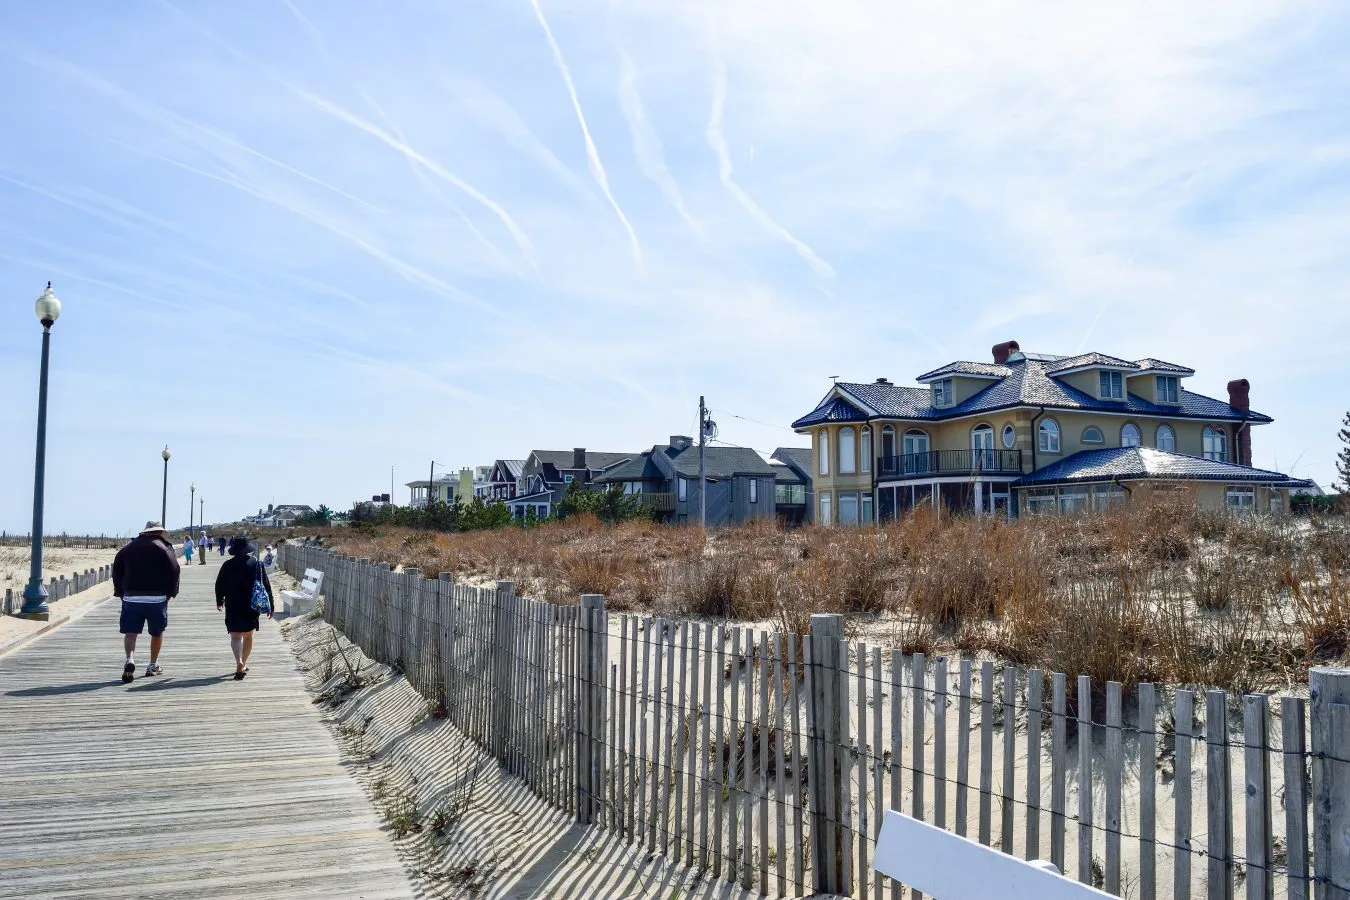 two people walking along a wooden boardwalk at the beach in rehoboth beach with beach houses visible to the right